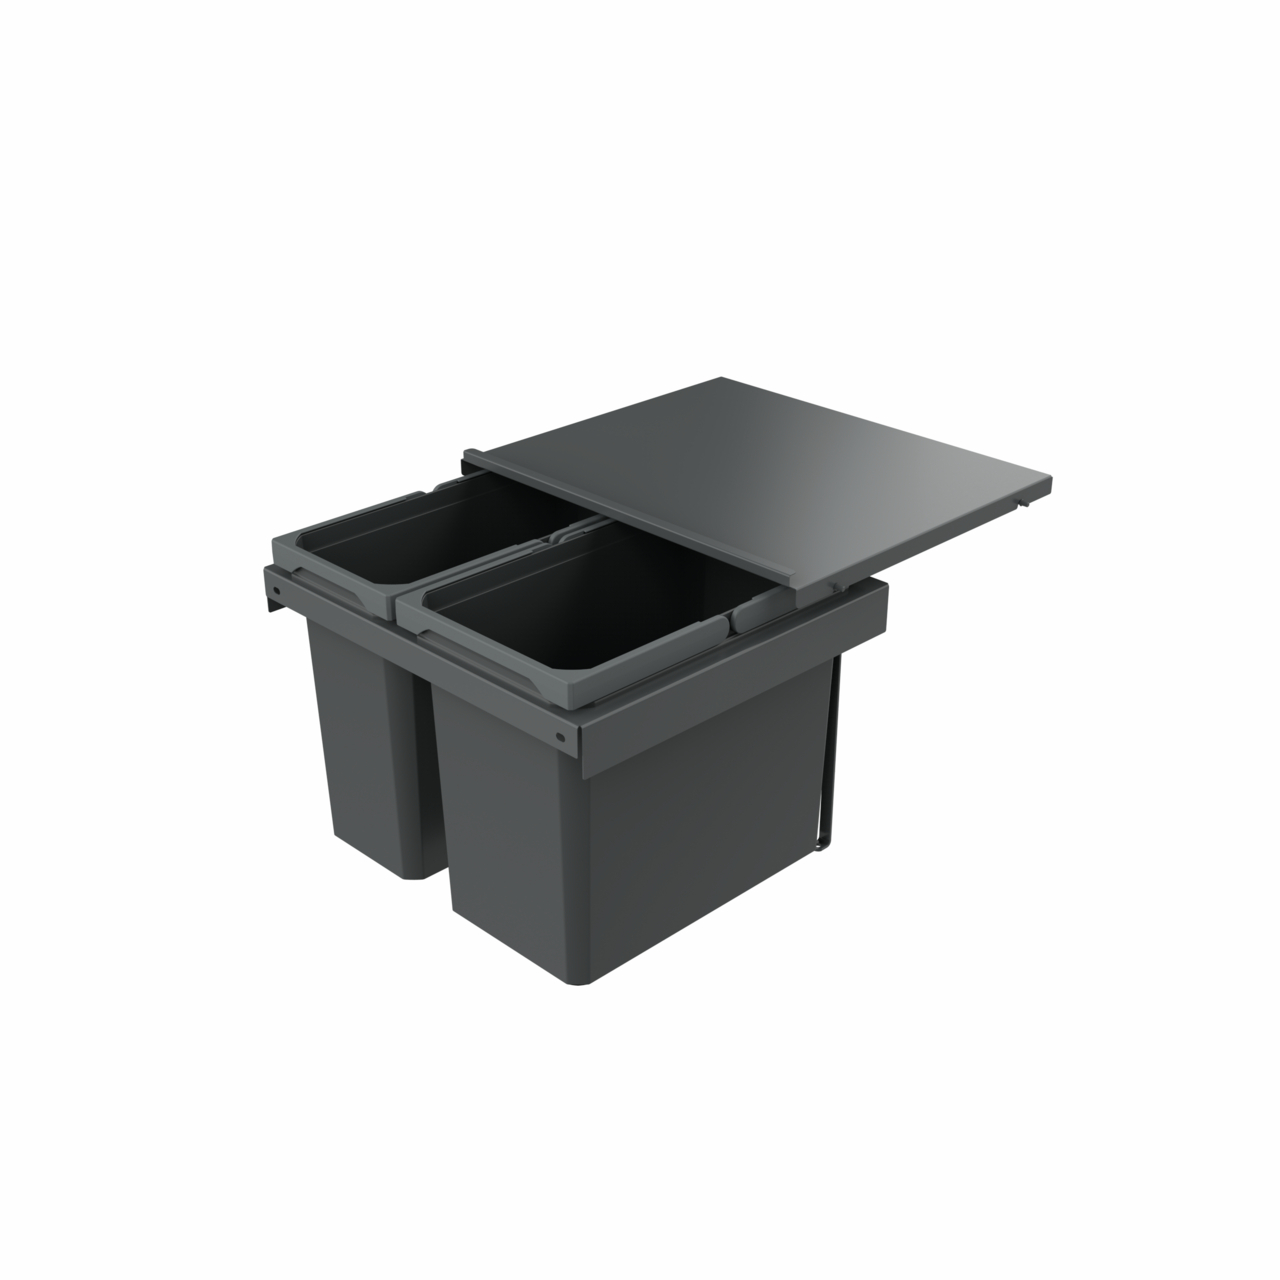  Cox Stand-UP® 350 S/500-2, anthracite, H 350 mm